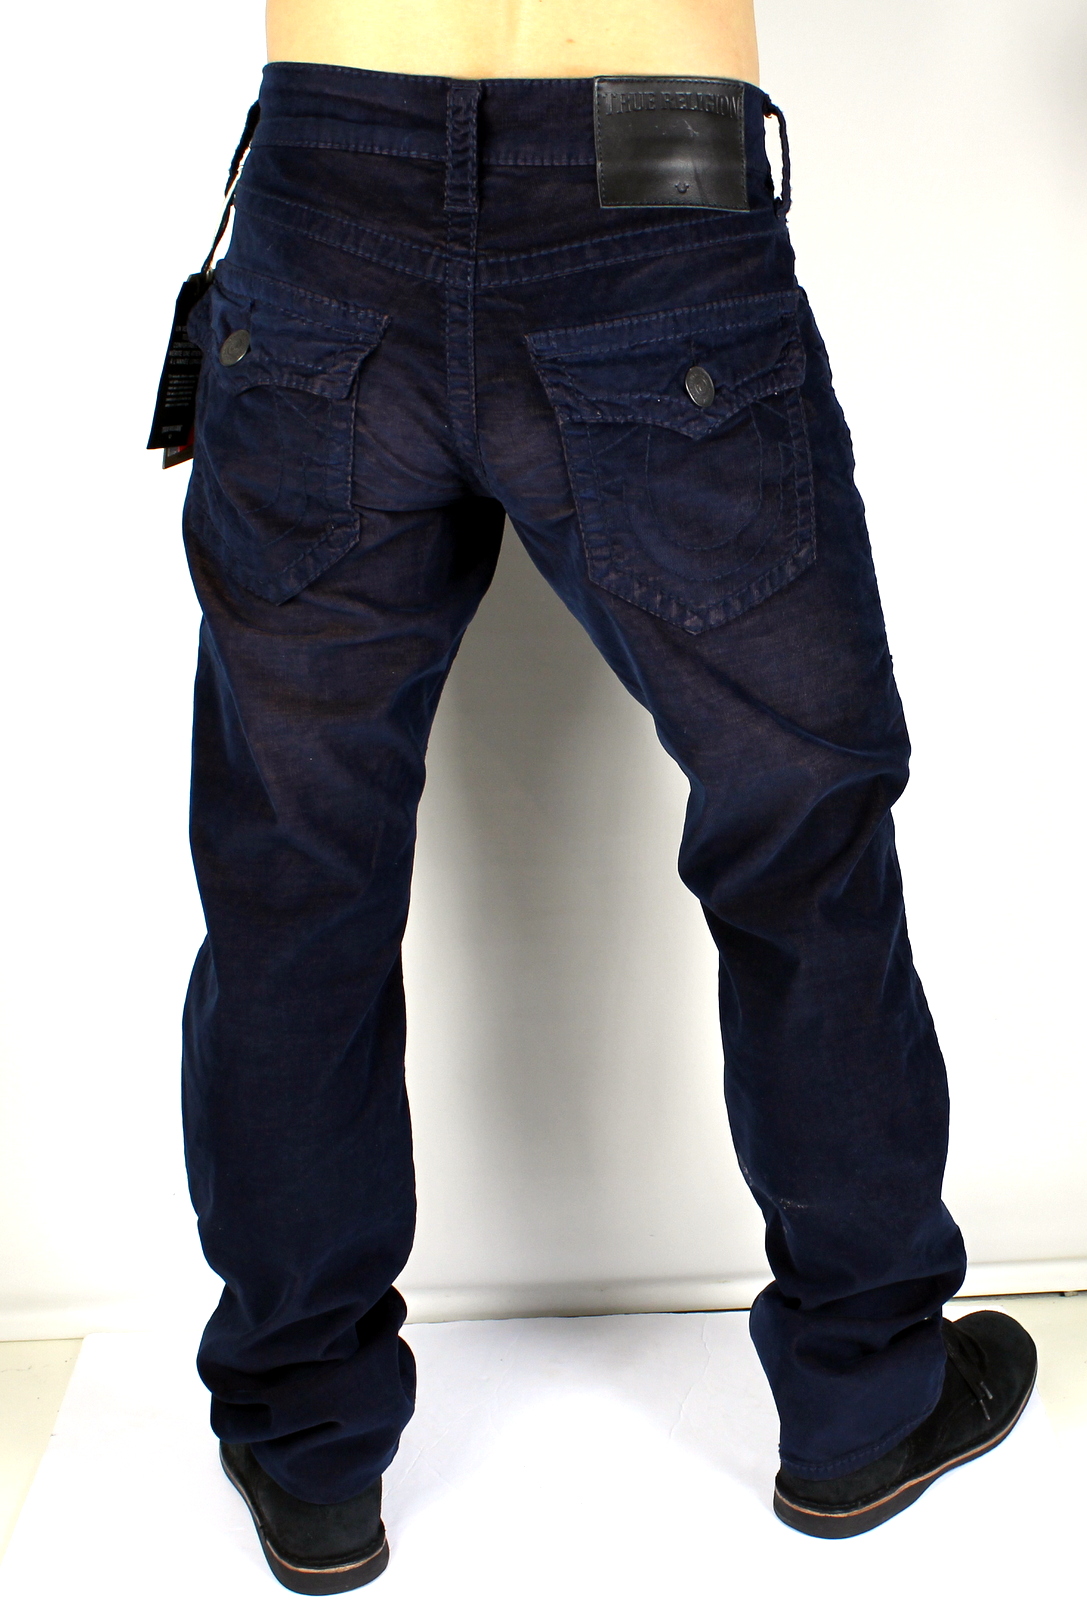 true religion relaxed fit jeans